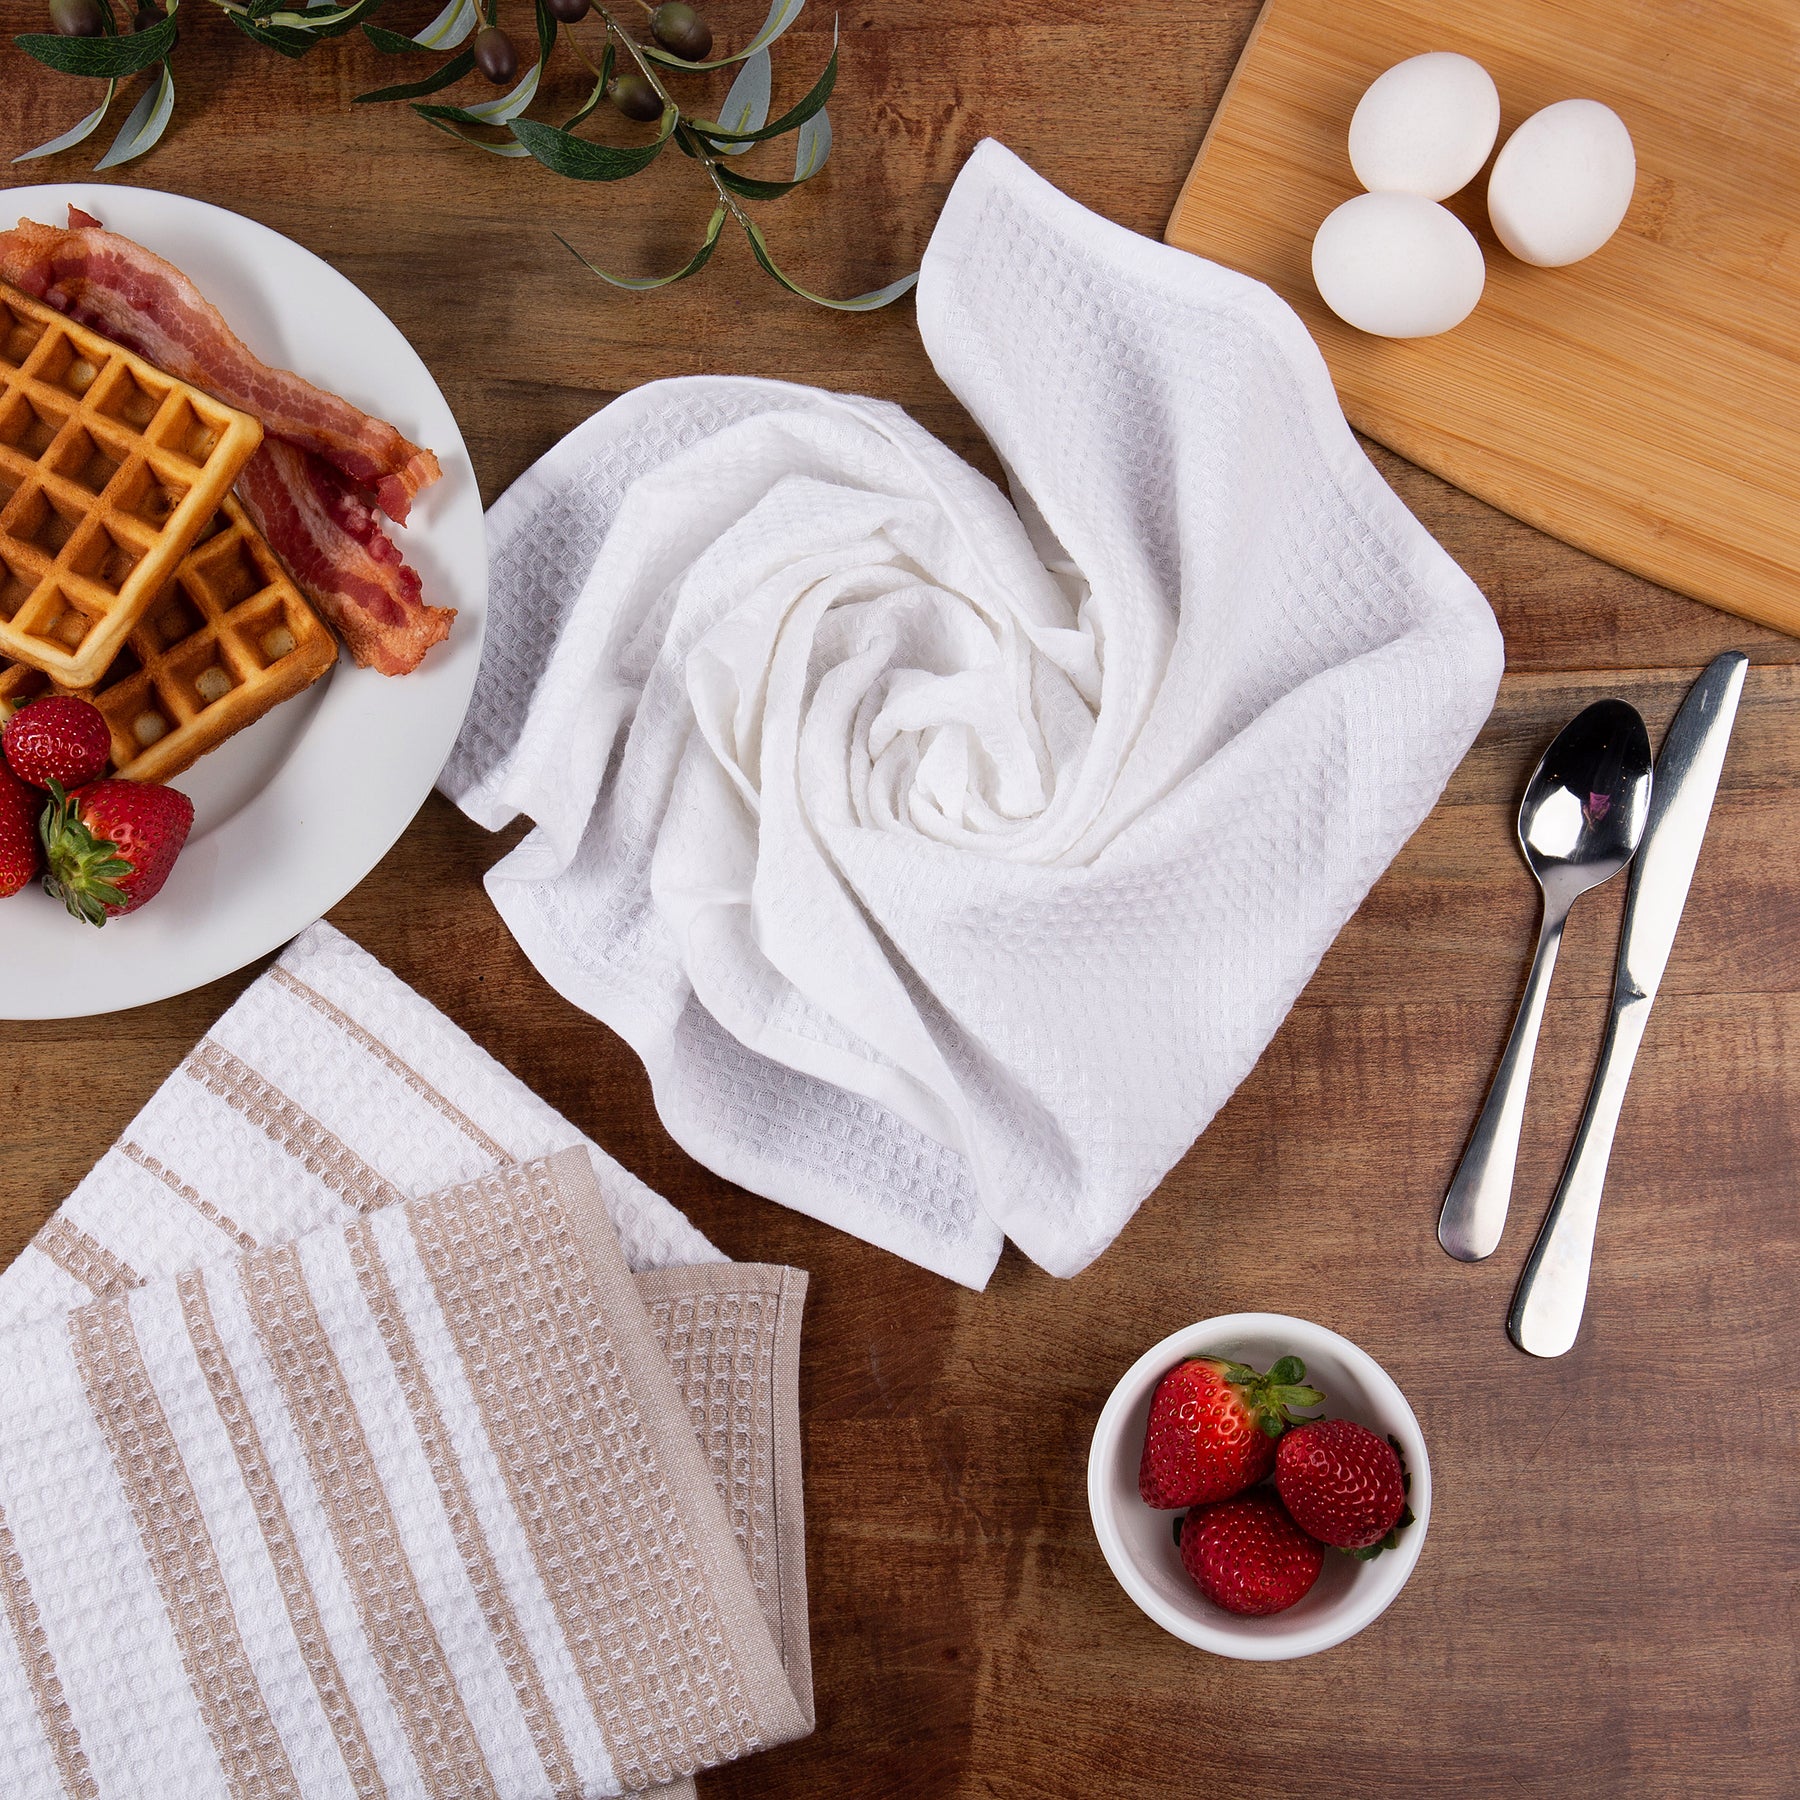 Sticky Toffee Cotton Waffle Weave Kitchen Dish Towels, 3 Pack